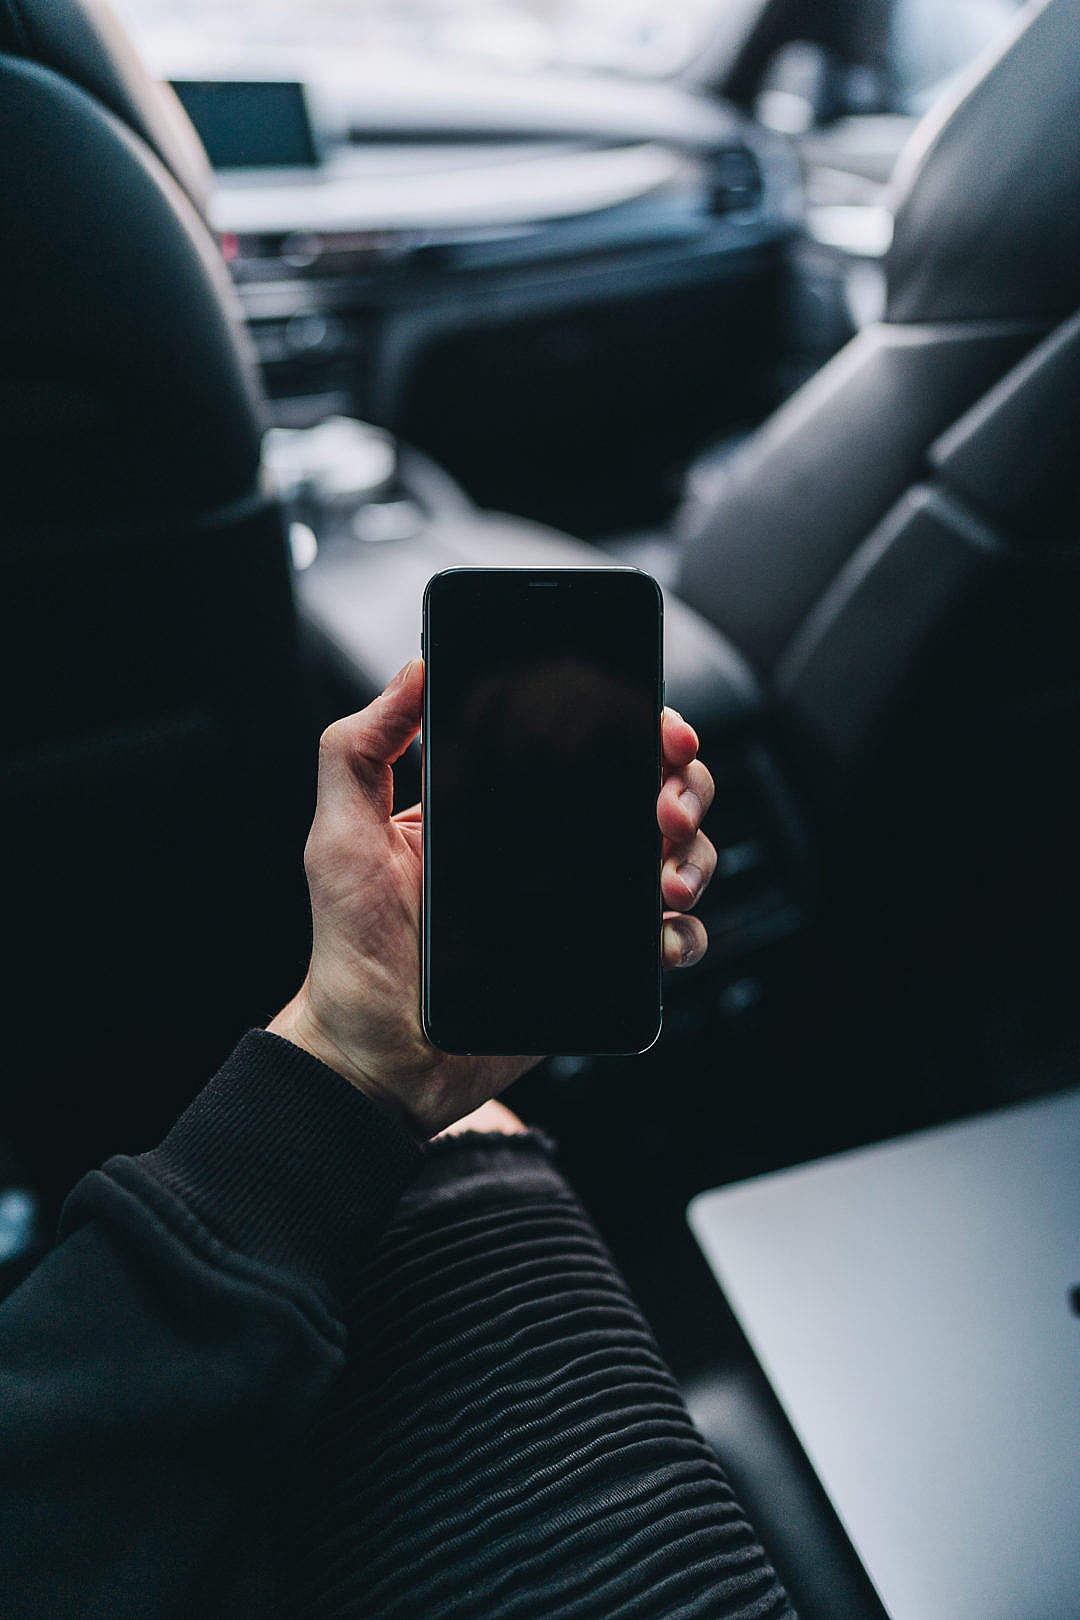 Download Man Sitting in a Car and Holding an iPhone FREE Stock Photo